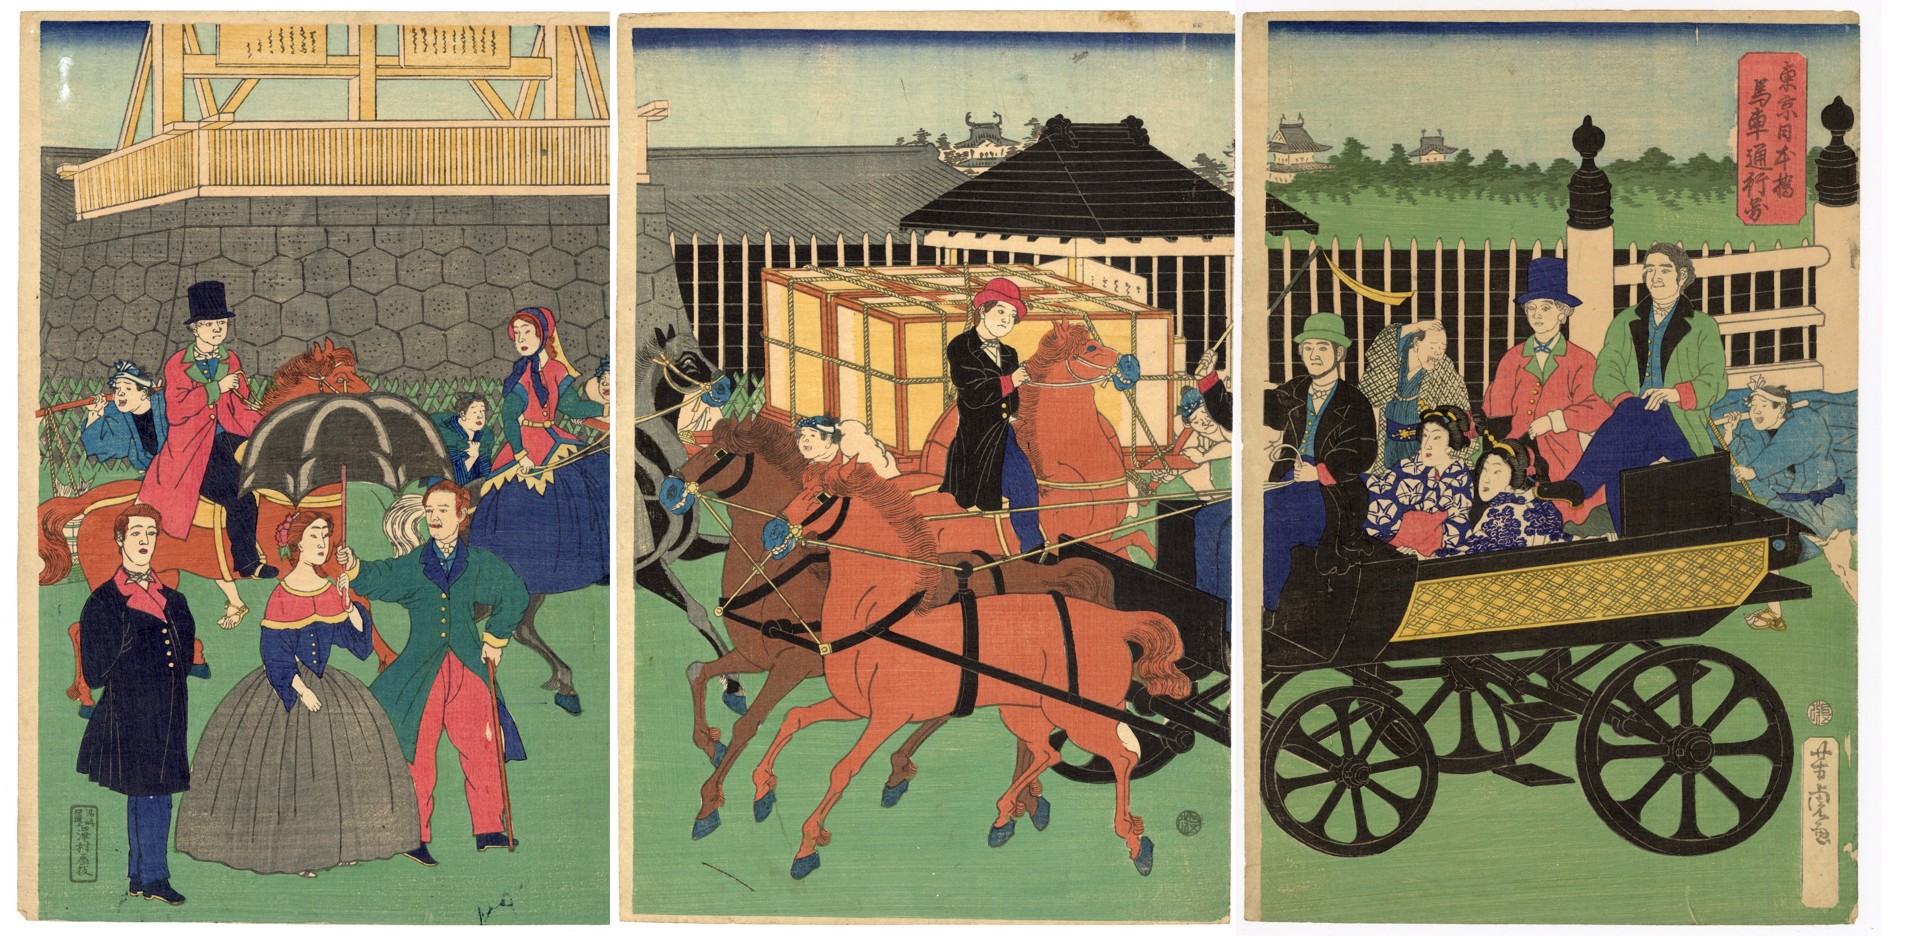 View of a Thoroughfare for Horse Drawn Carriages in Nihonbashi, Tokyo by Yoshitora